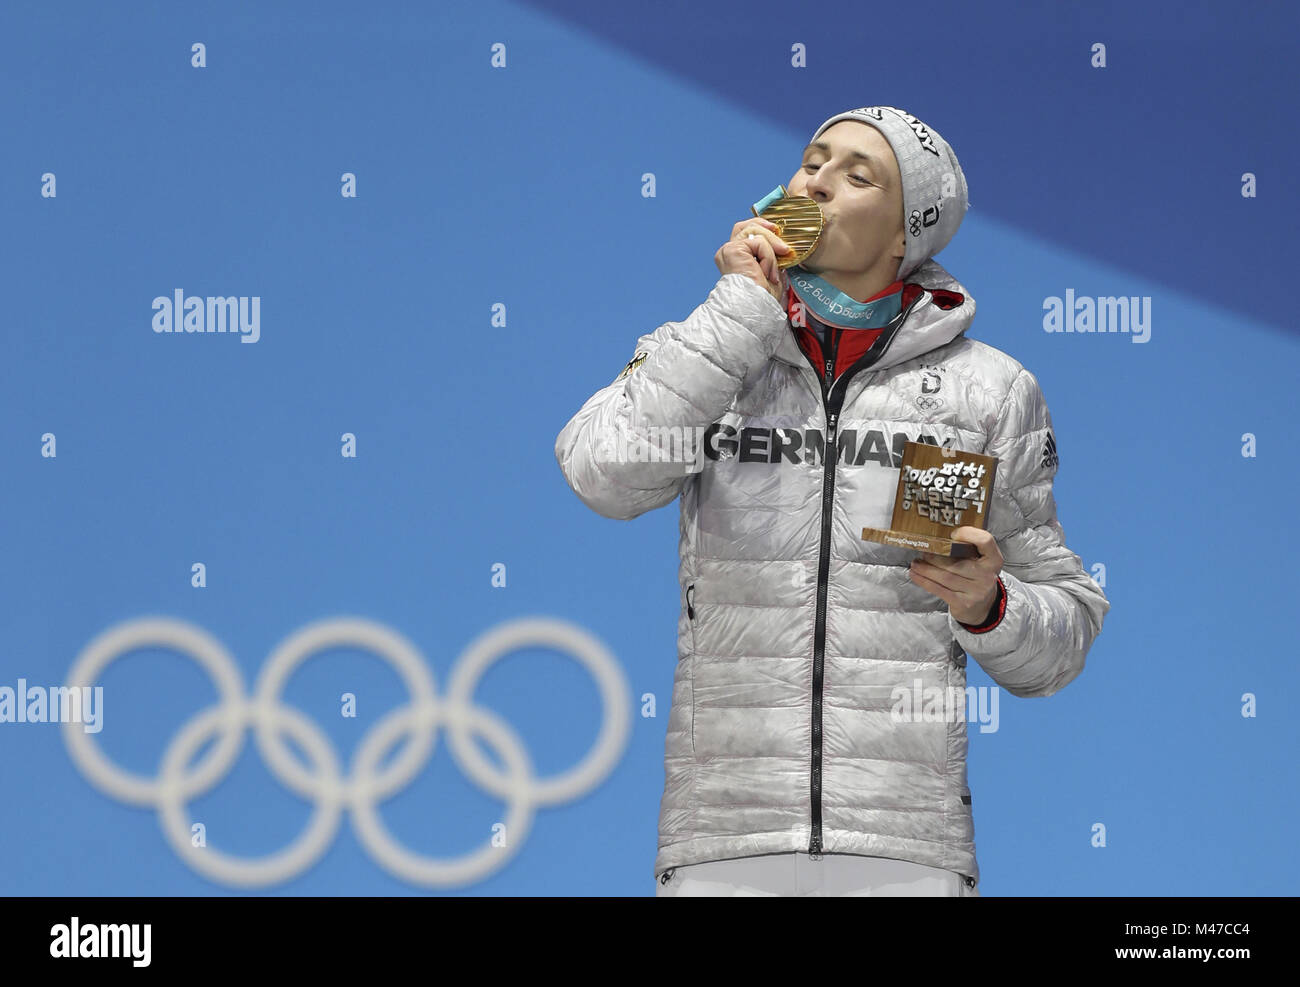 Pyeongchang, South Korea. 15th Feb, 2018. Gold medalist Eric Frenzel from Germany poses for photos during the medal ceremony of individual gundersen NH/10KM event of nordic combined at Pyeongchang 2018 Winter Olympic Games at Medal Plaza, PyeongChang, South Korea, Feb. 15, 2018. Credit: Wu Zhuang/Xinhua/Alamy Live News Stock Photo